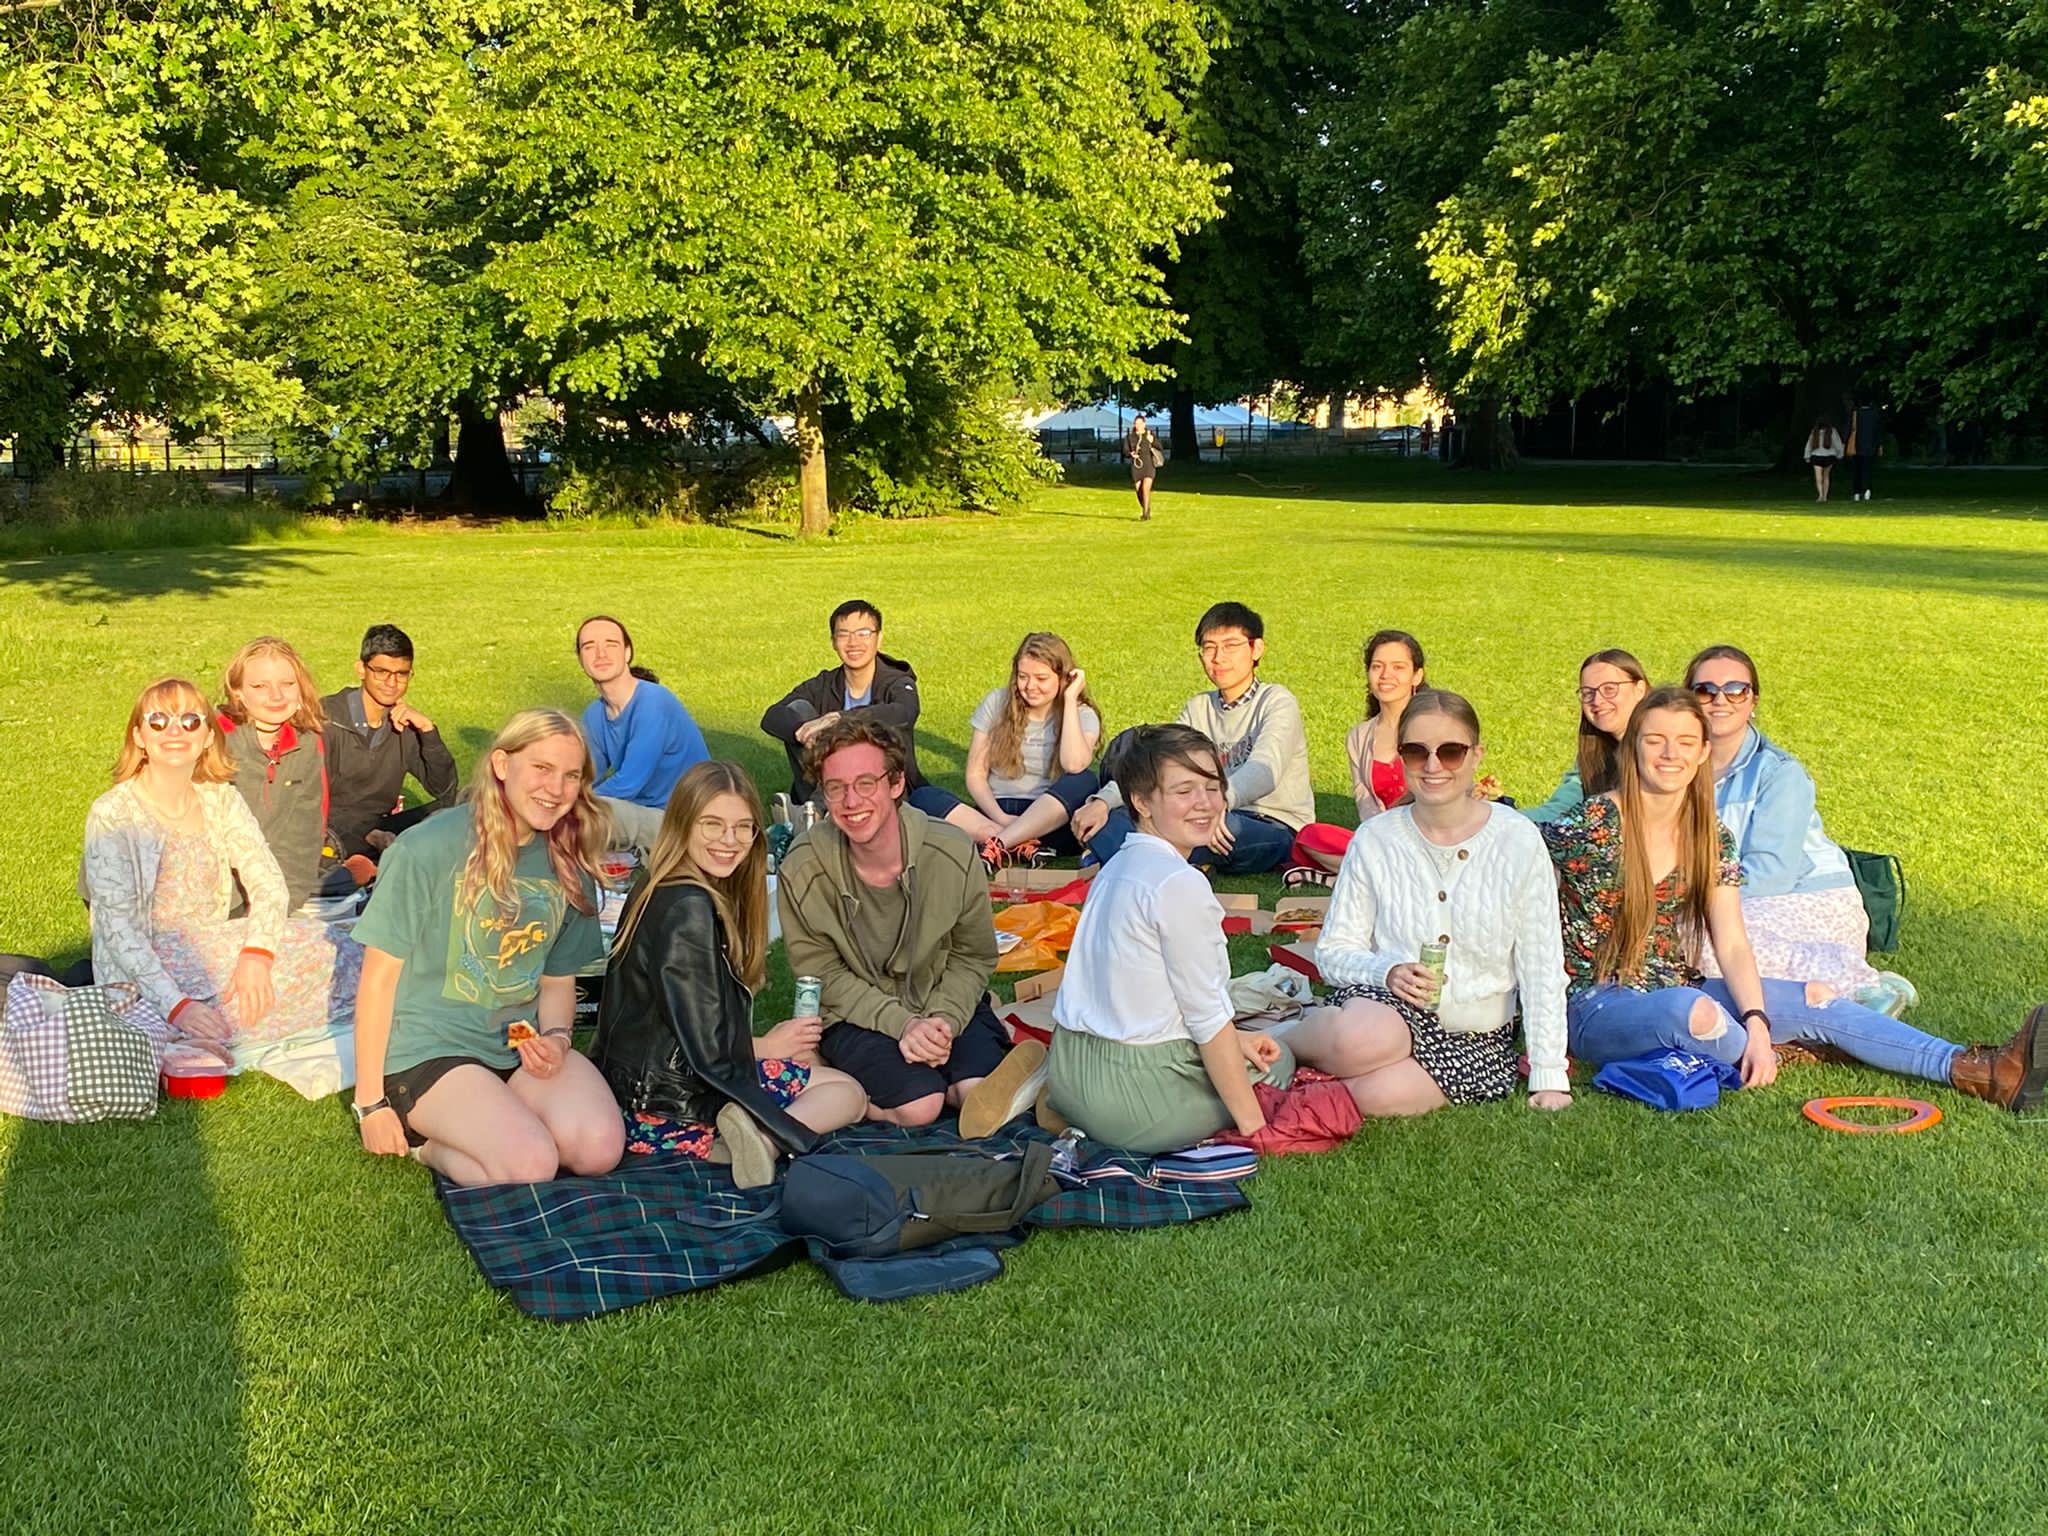 A group of students having a picnic: Oliwia is at the front, smiling